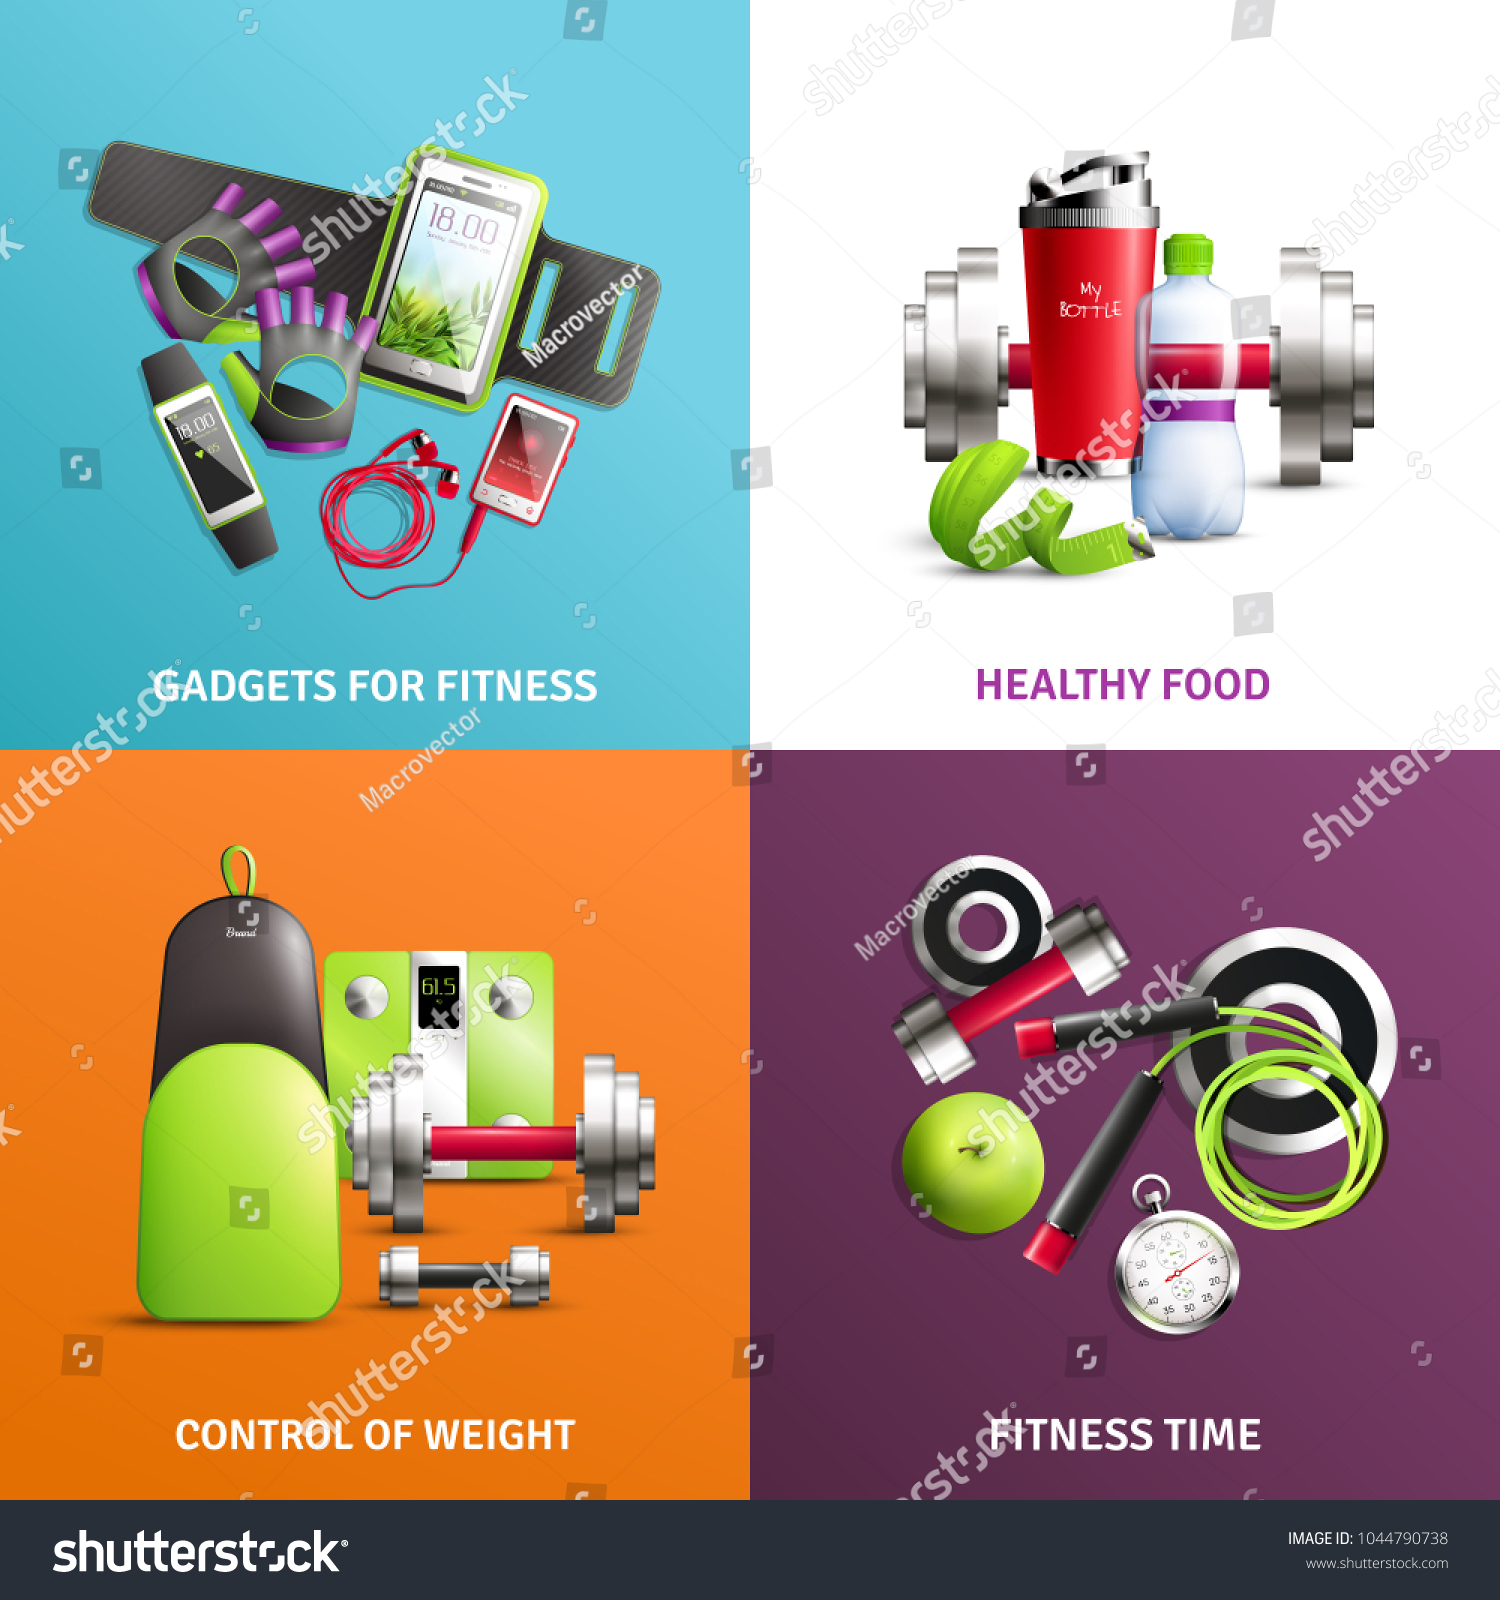 Fitness Gym Concept Icons Set Control Stock Vector (Royalty Free ...